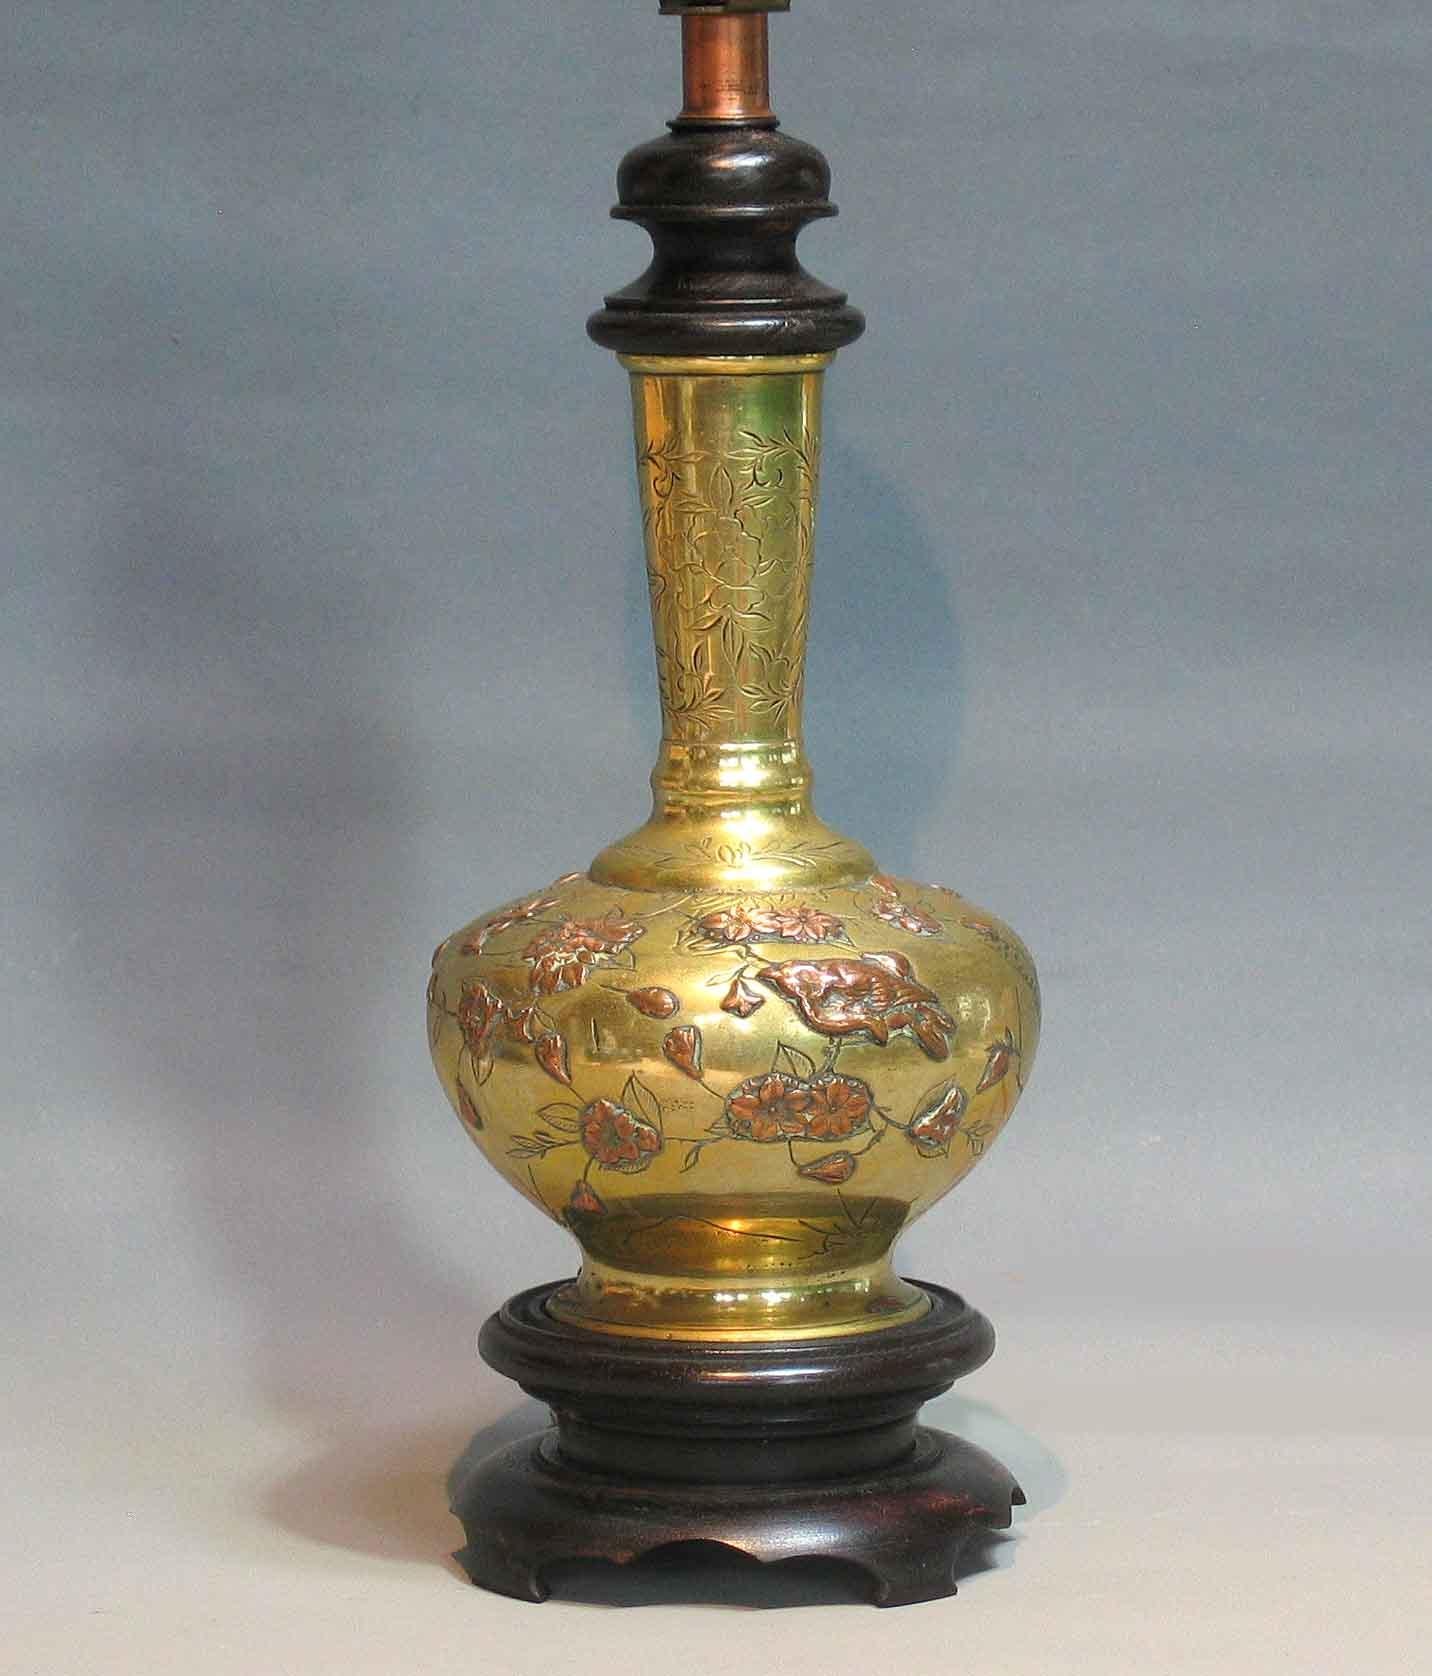 Japanese mixed metal vase
Mounted as a lamp
Meiji period

The bulbous-form body with long conical neck
decorated in high-relief copper with a sparrows
perched on a branch of various flowering plants.
Mounted on a wood base and wood collar on